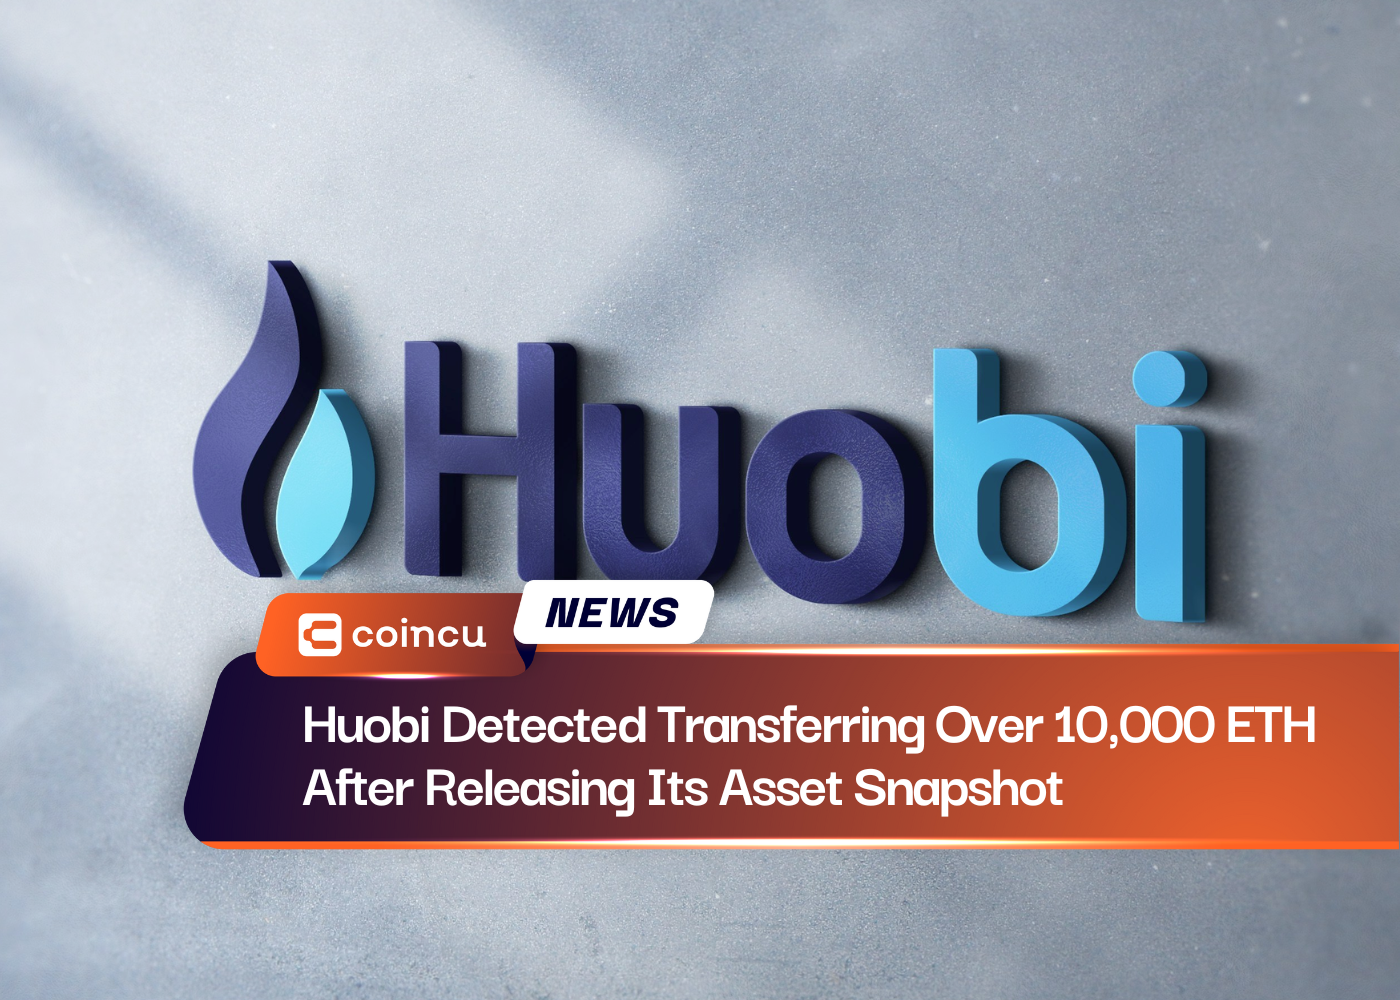 Huobi Detected Transferring Over 10,000 ETH After Releasing Its Asset Snapshot